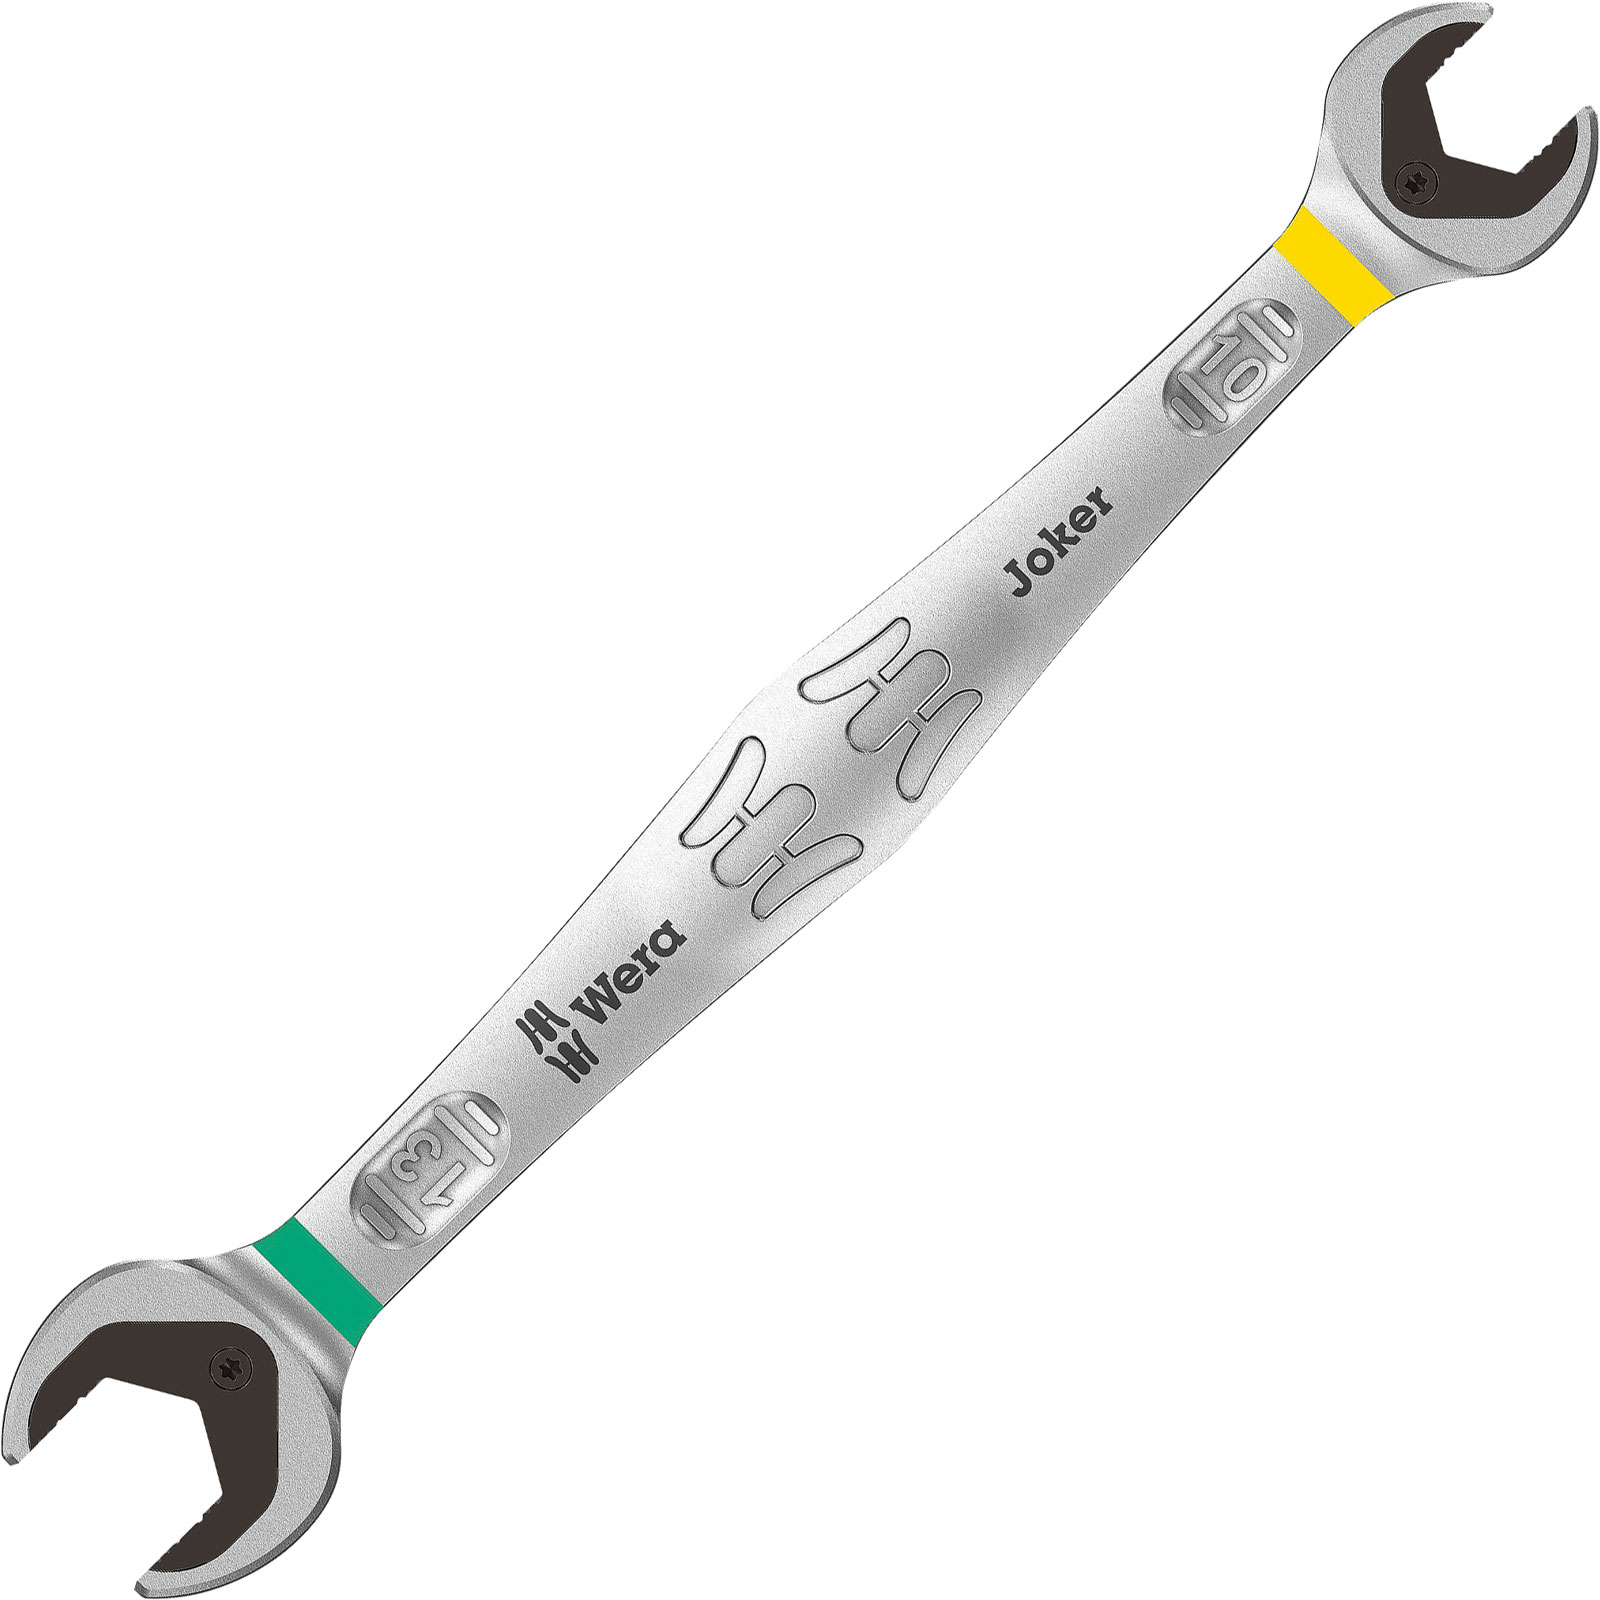 Wera 05003760001 6002 Joker Double Open-Ended Wrenches 10 x 13 x 167mm